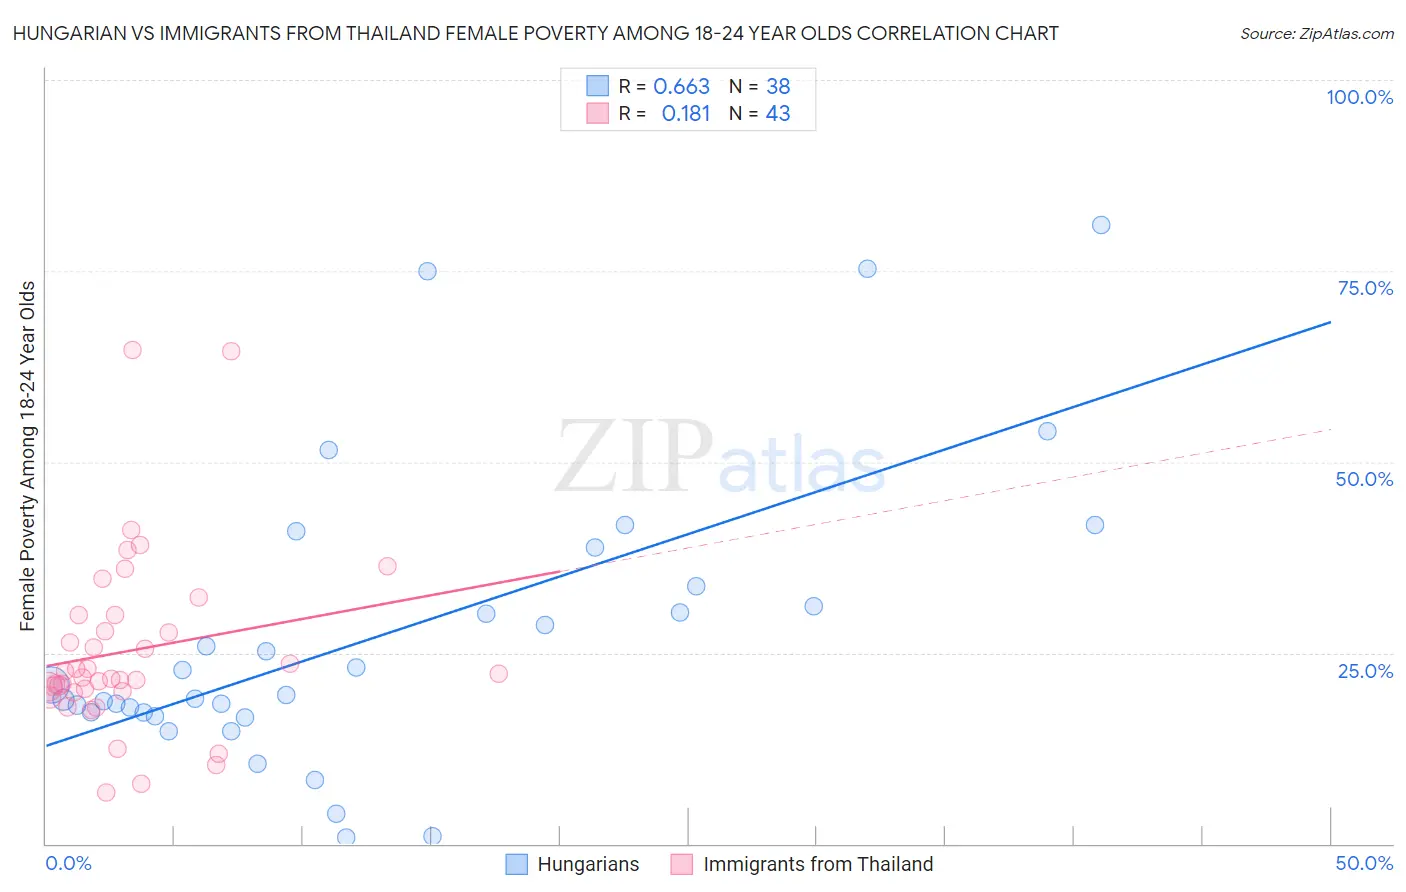 Hungarian vs Immigrants from Thailand Female Poverty Among 18-24 Year Olds